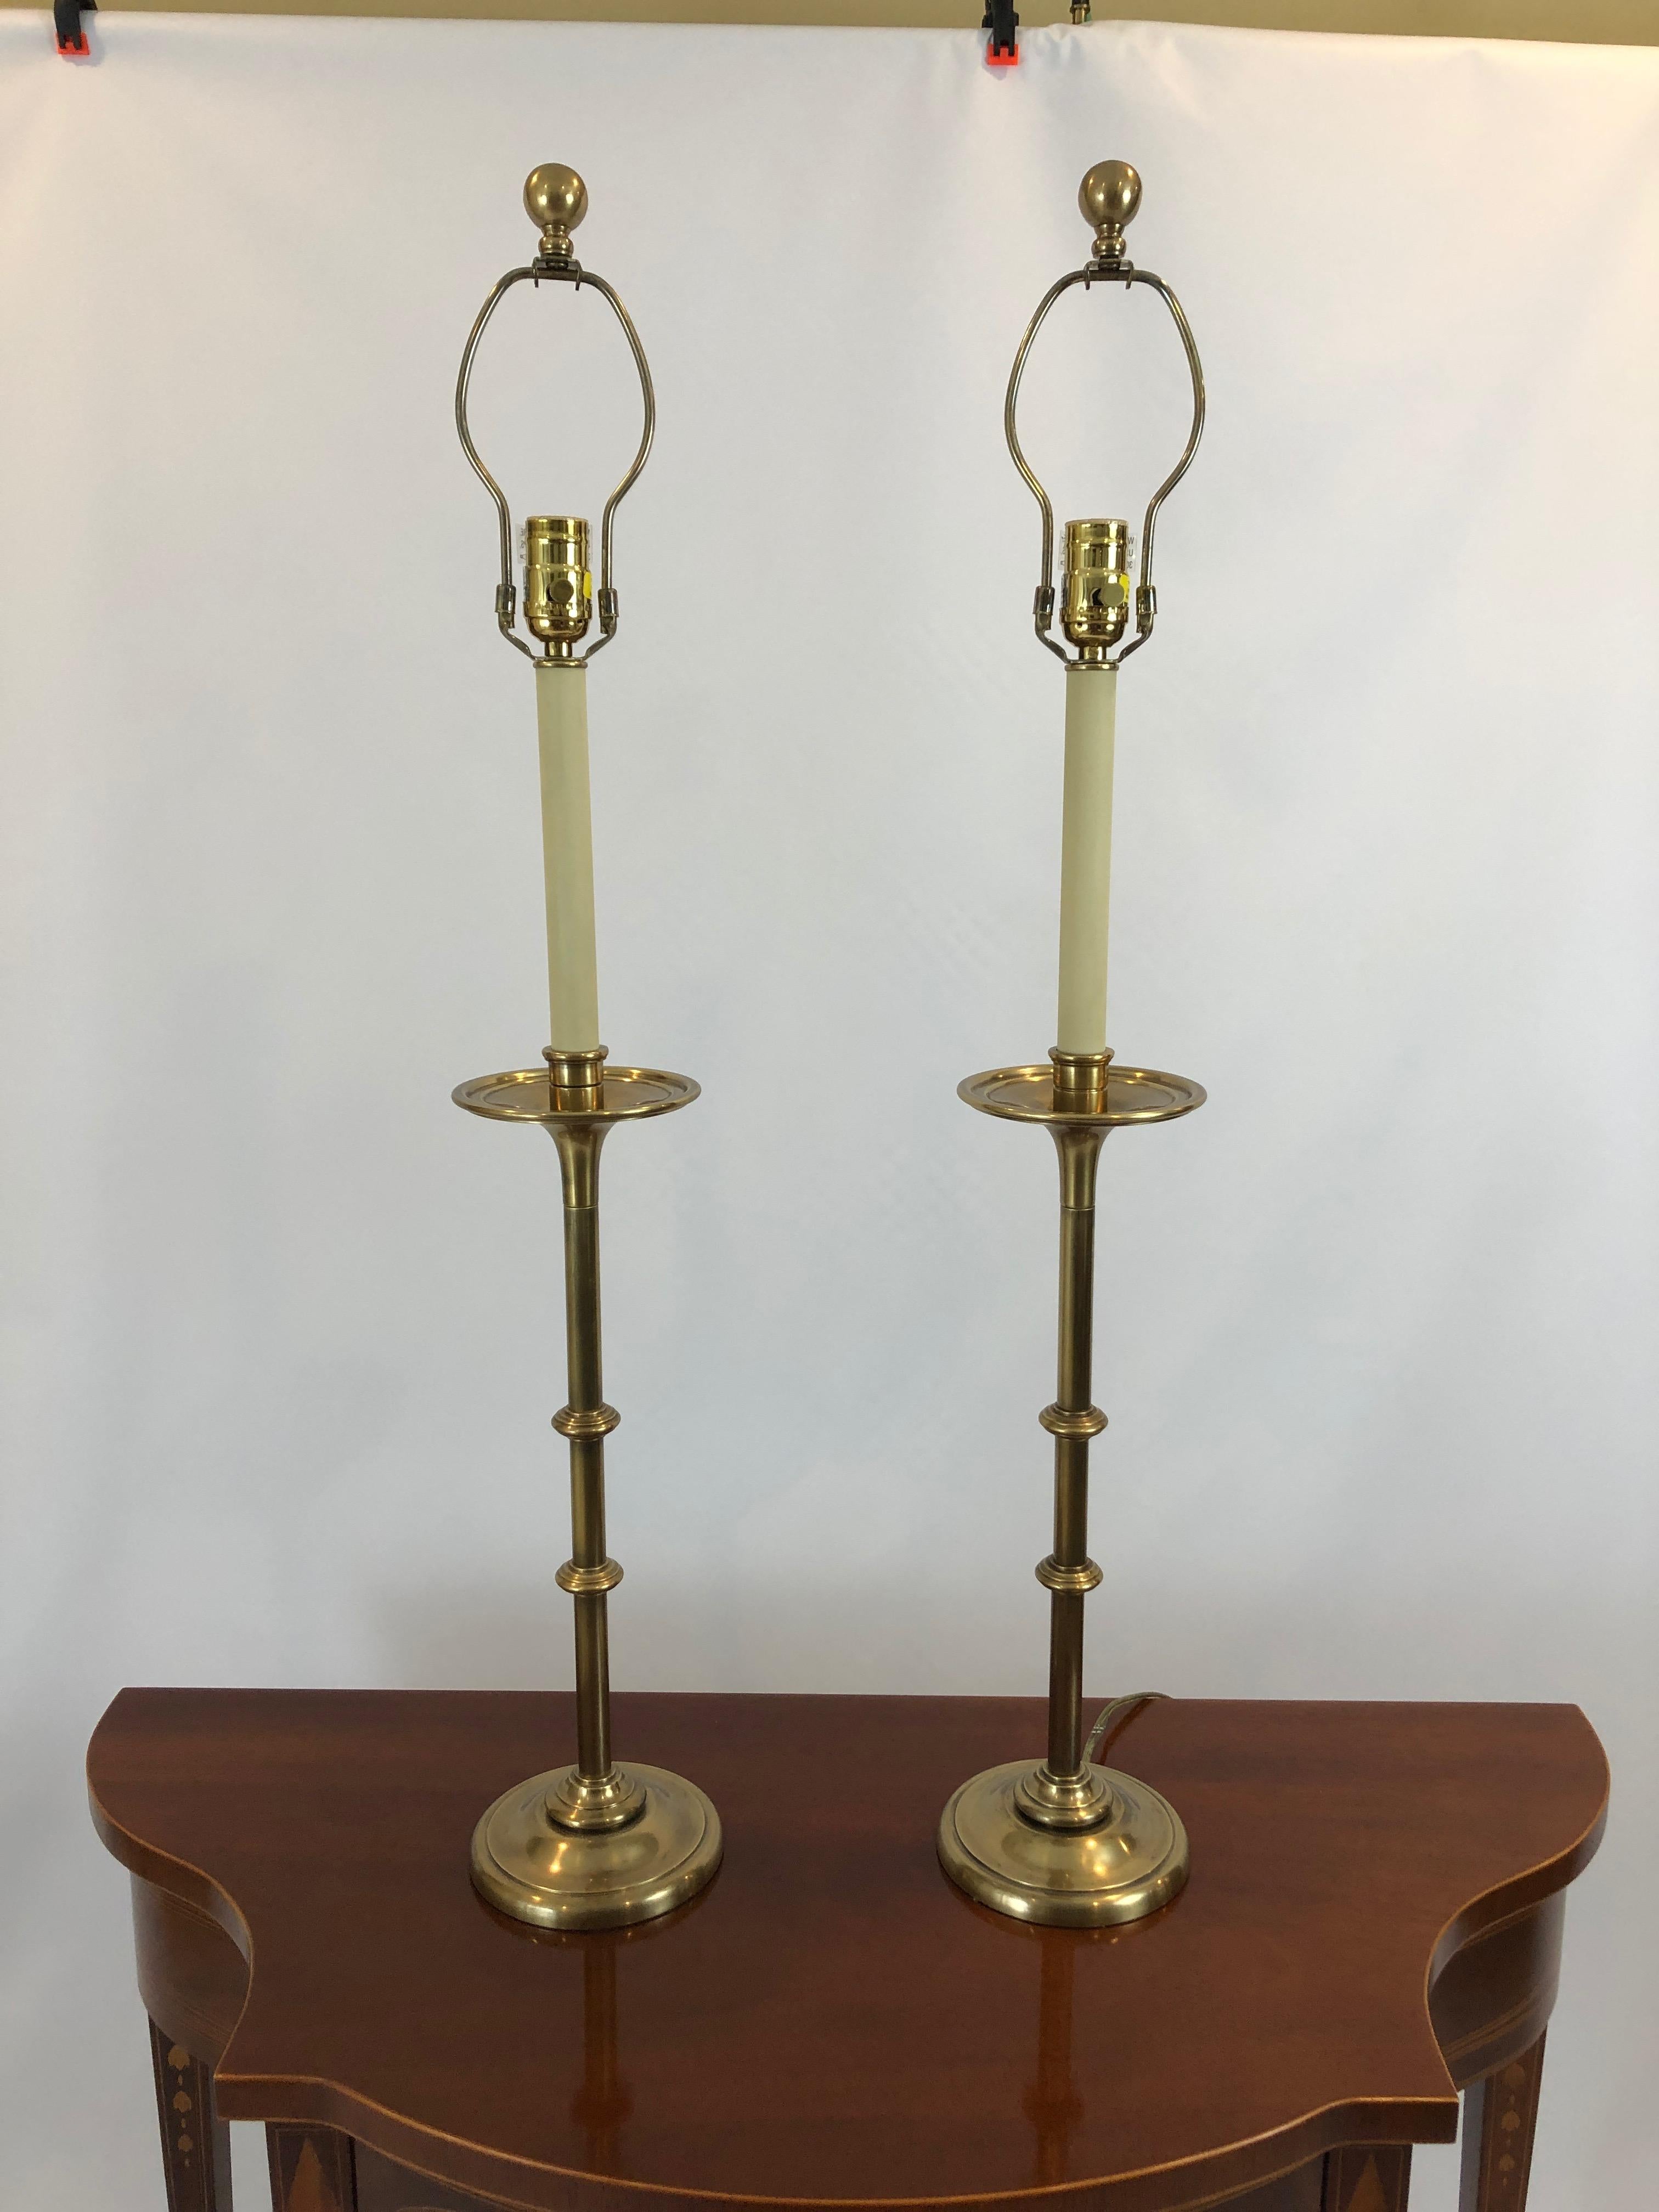 Classically elegant pair of antiqued brass candlestick lamps having custom black shades lined in antiqued gold foil.
Base is 6